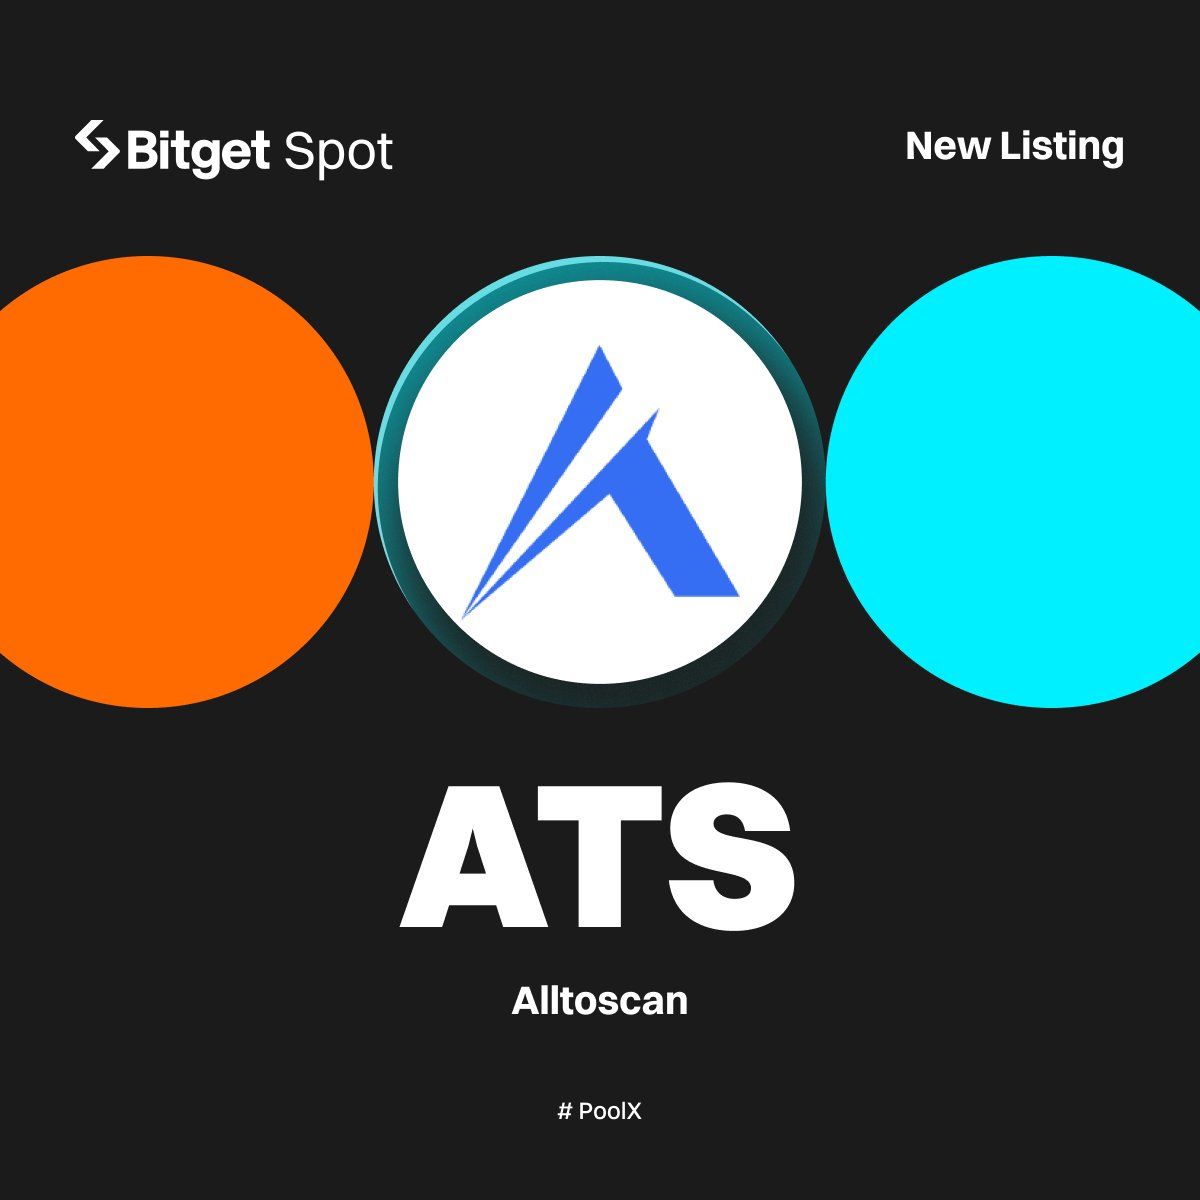 $ATS Token will start trading on Bitget on May 13th! The project is currently available on mexc.com and gate.io and has been performing great since the first day it was listed. I expect a massive increase with the addition to Bitget. 💰 Get your